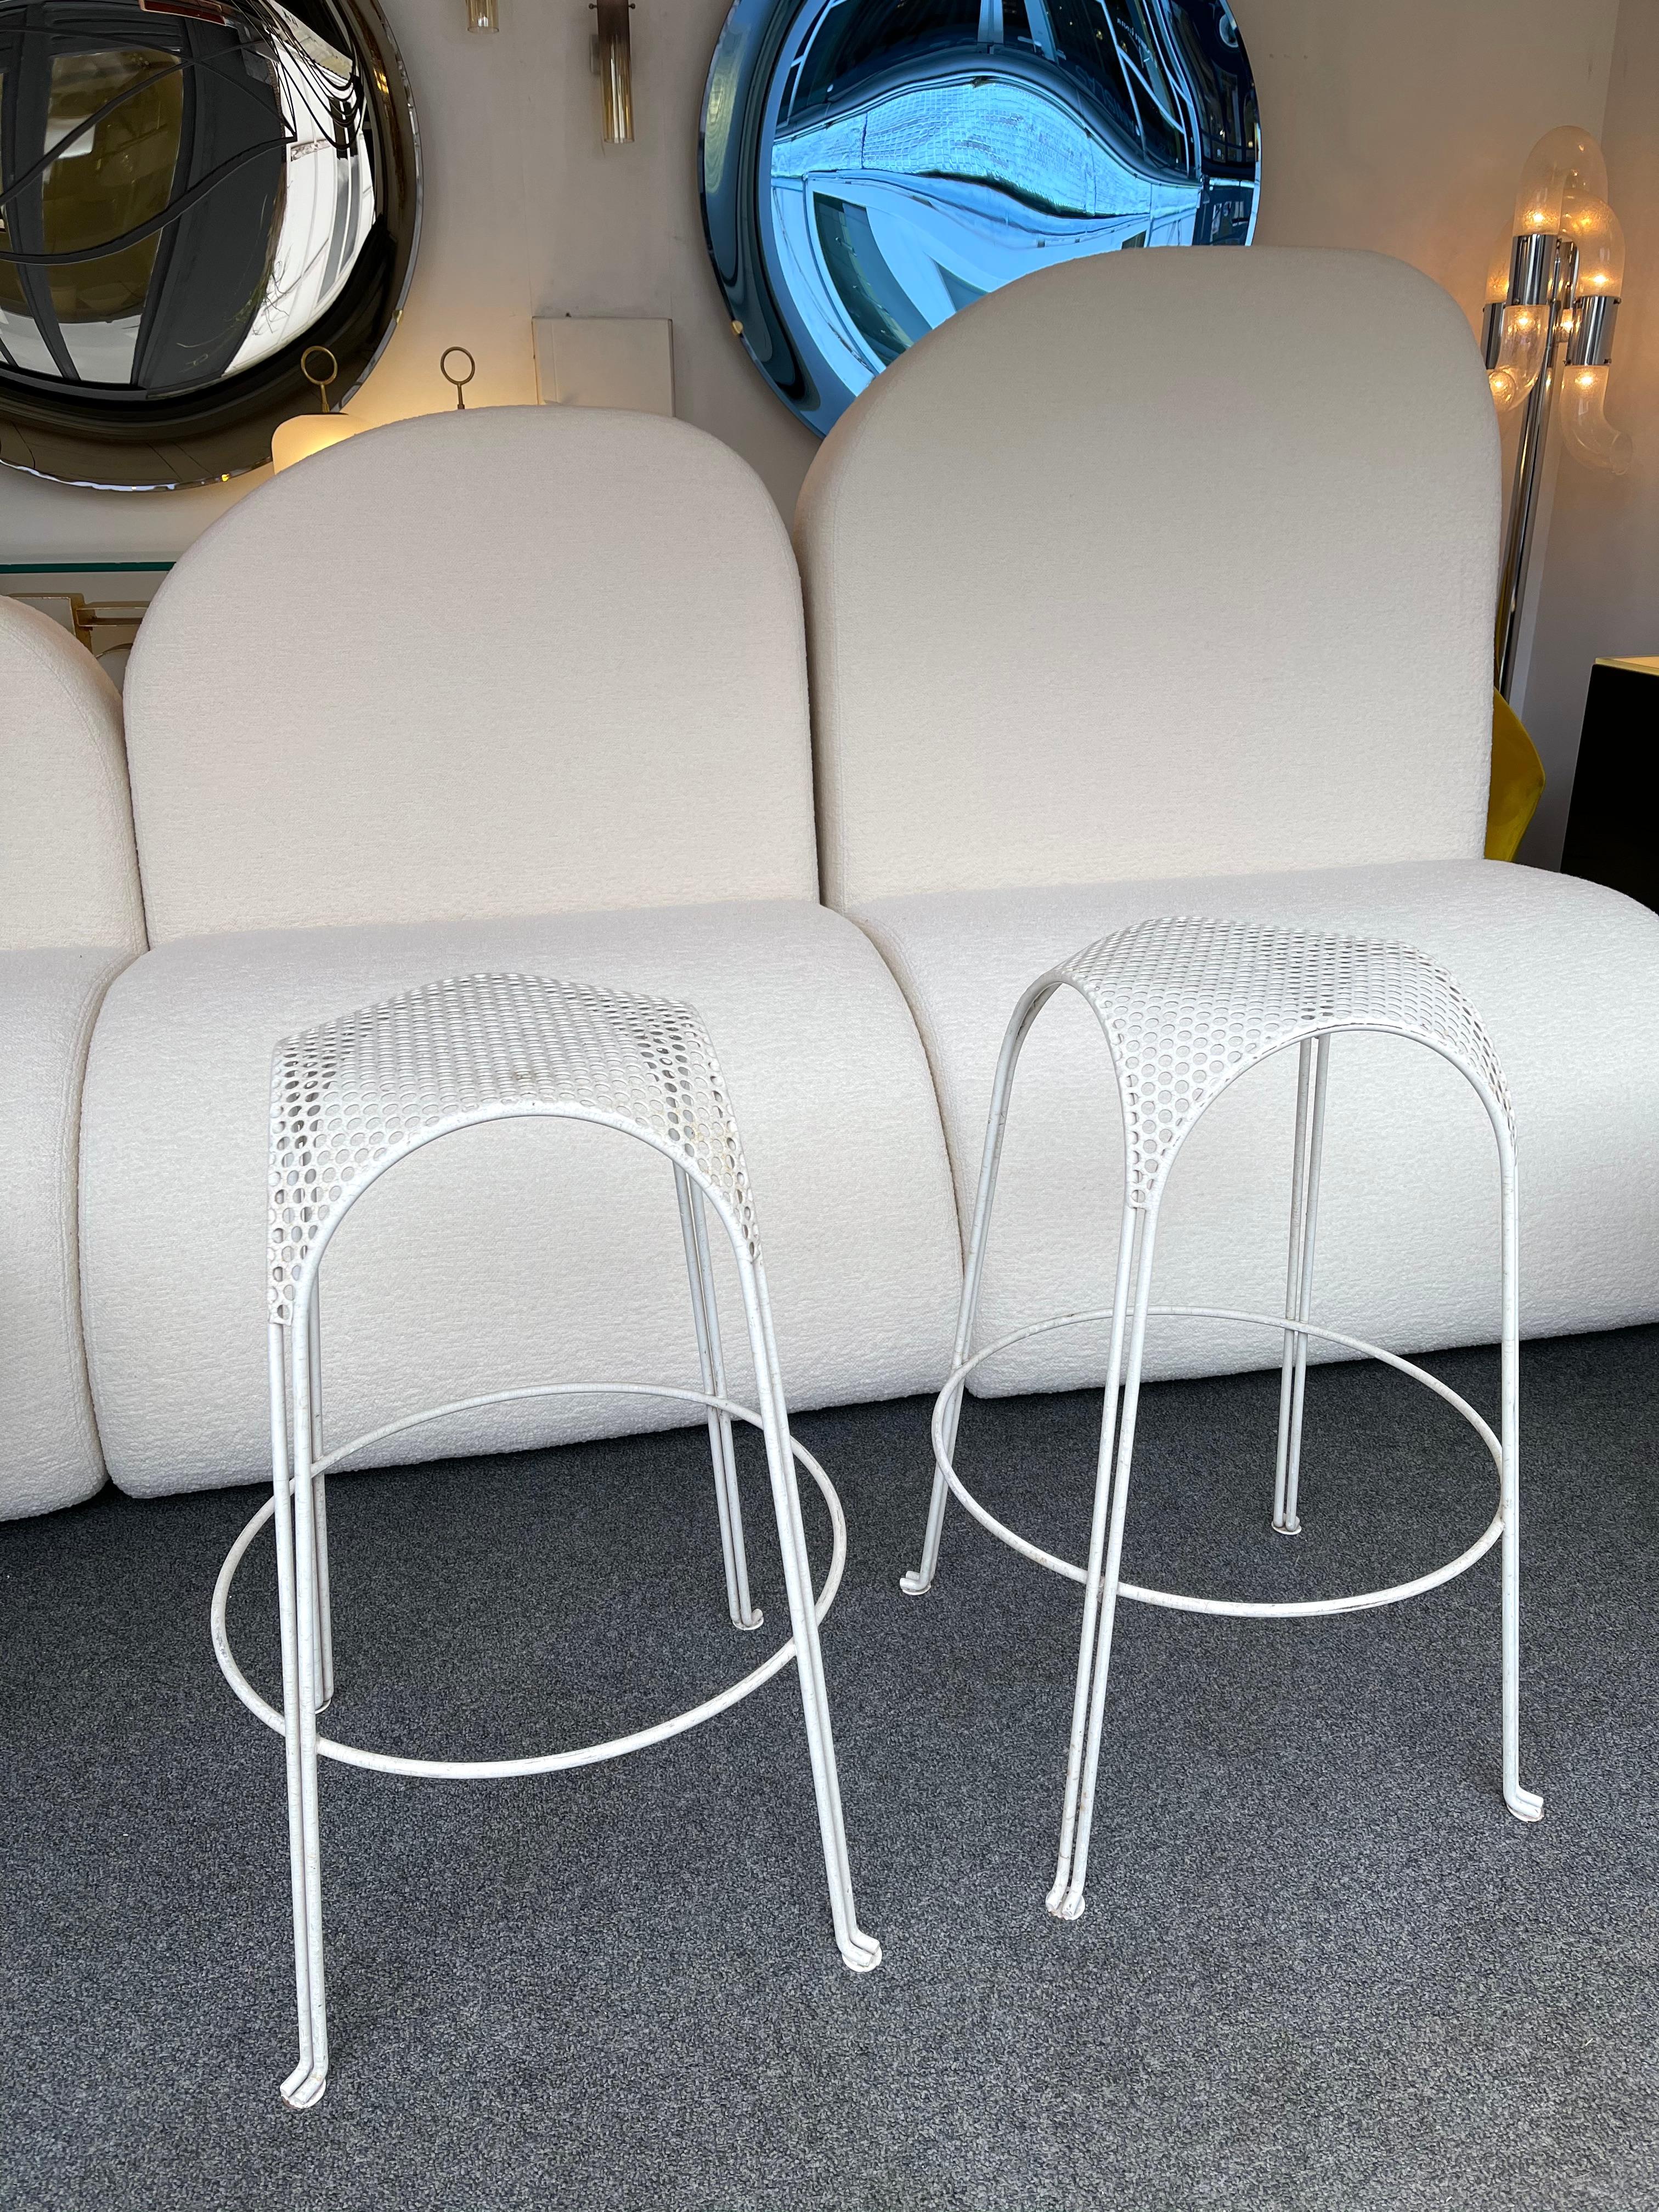 Pair of Bar Stools Metal Perforated by Maurizio Tempestini, Italy, 1950s For Sale 1